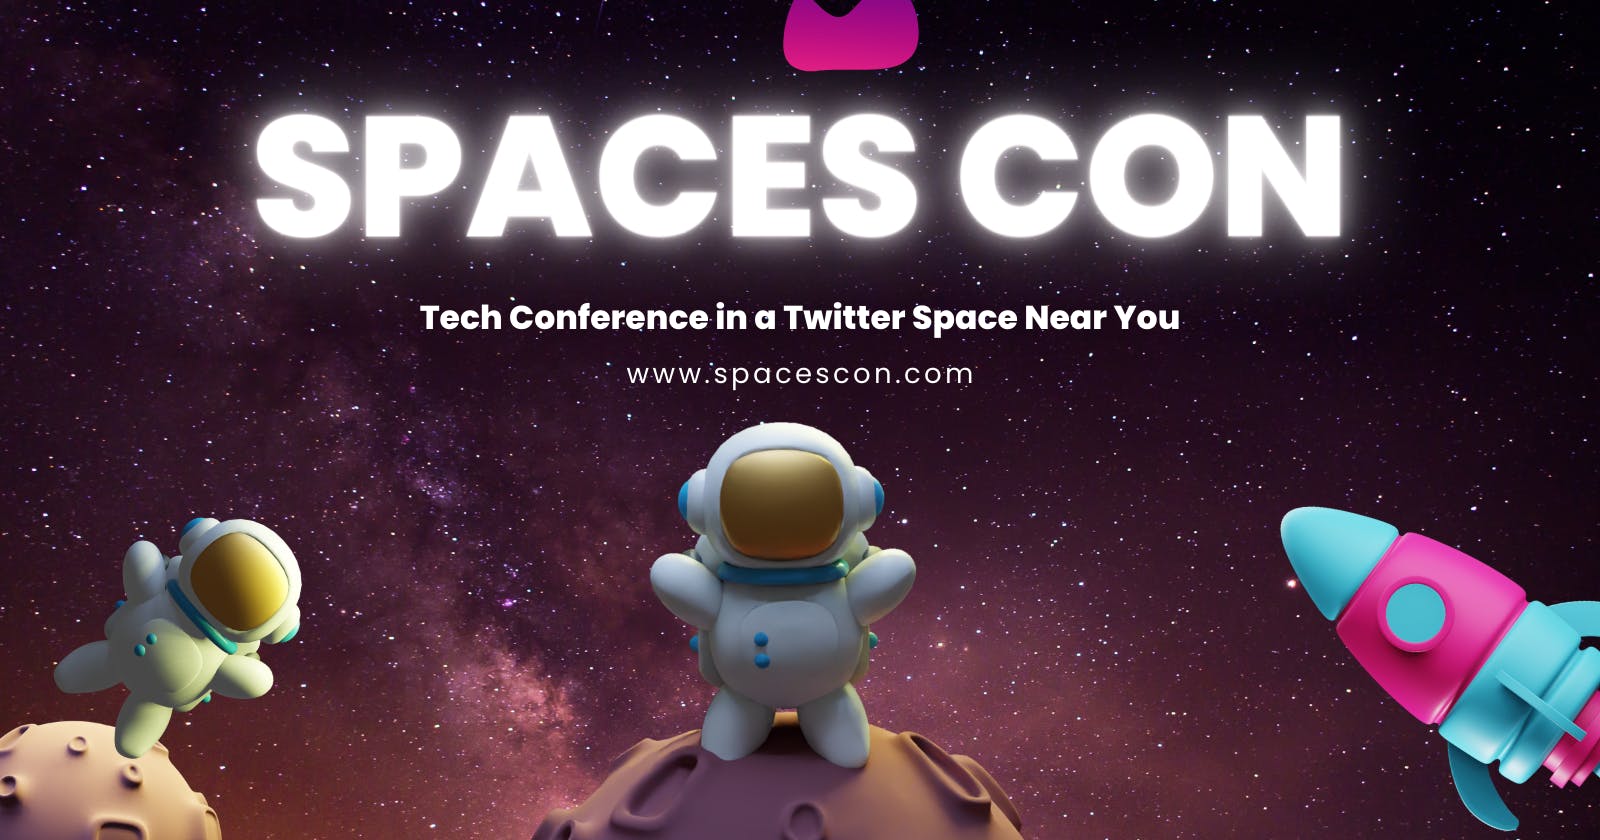 🚀👩🏽‍🚀Spaces Con 2022: Tech Conference using Twitter Spaces 👾🛸